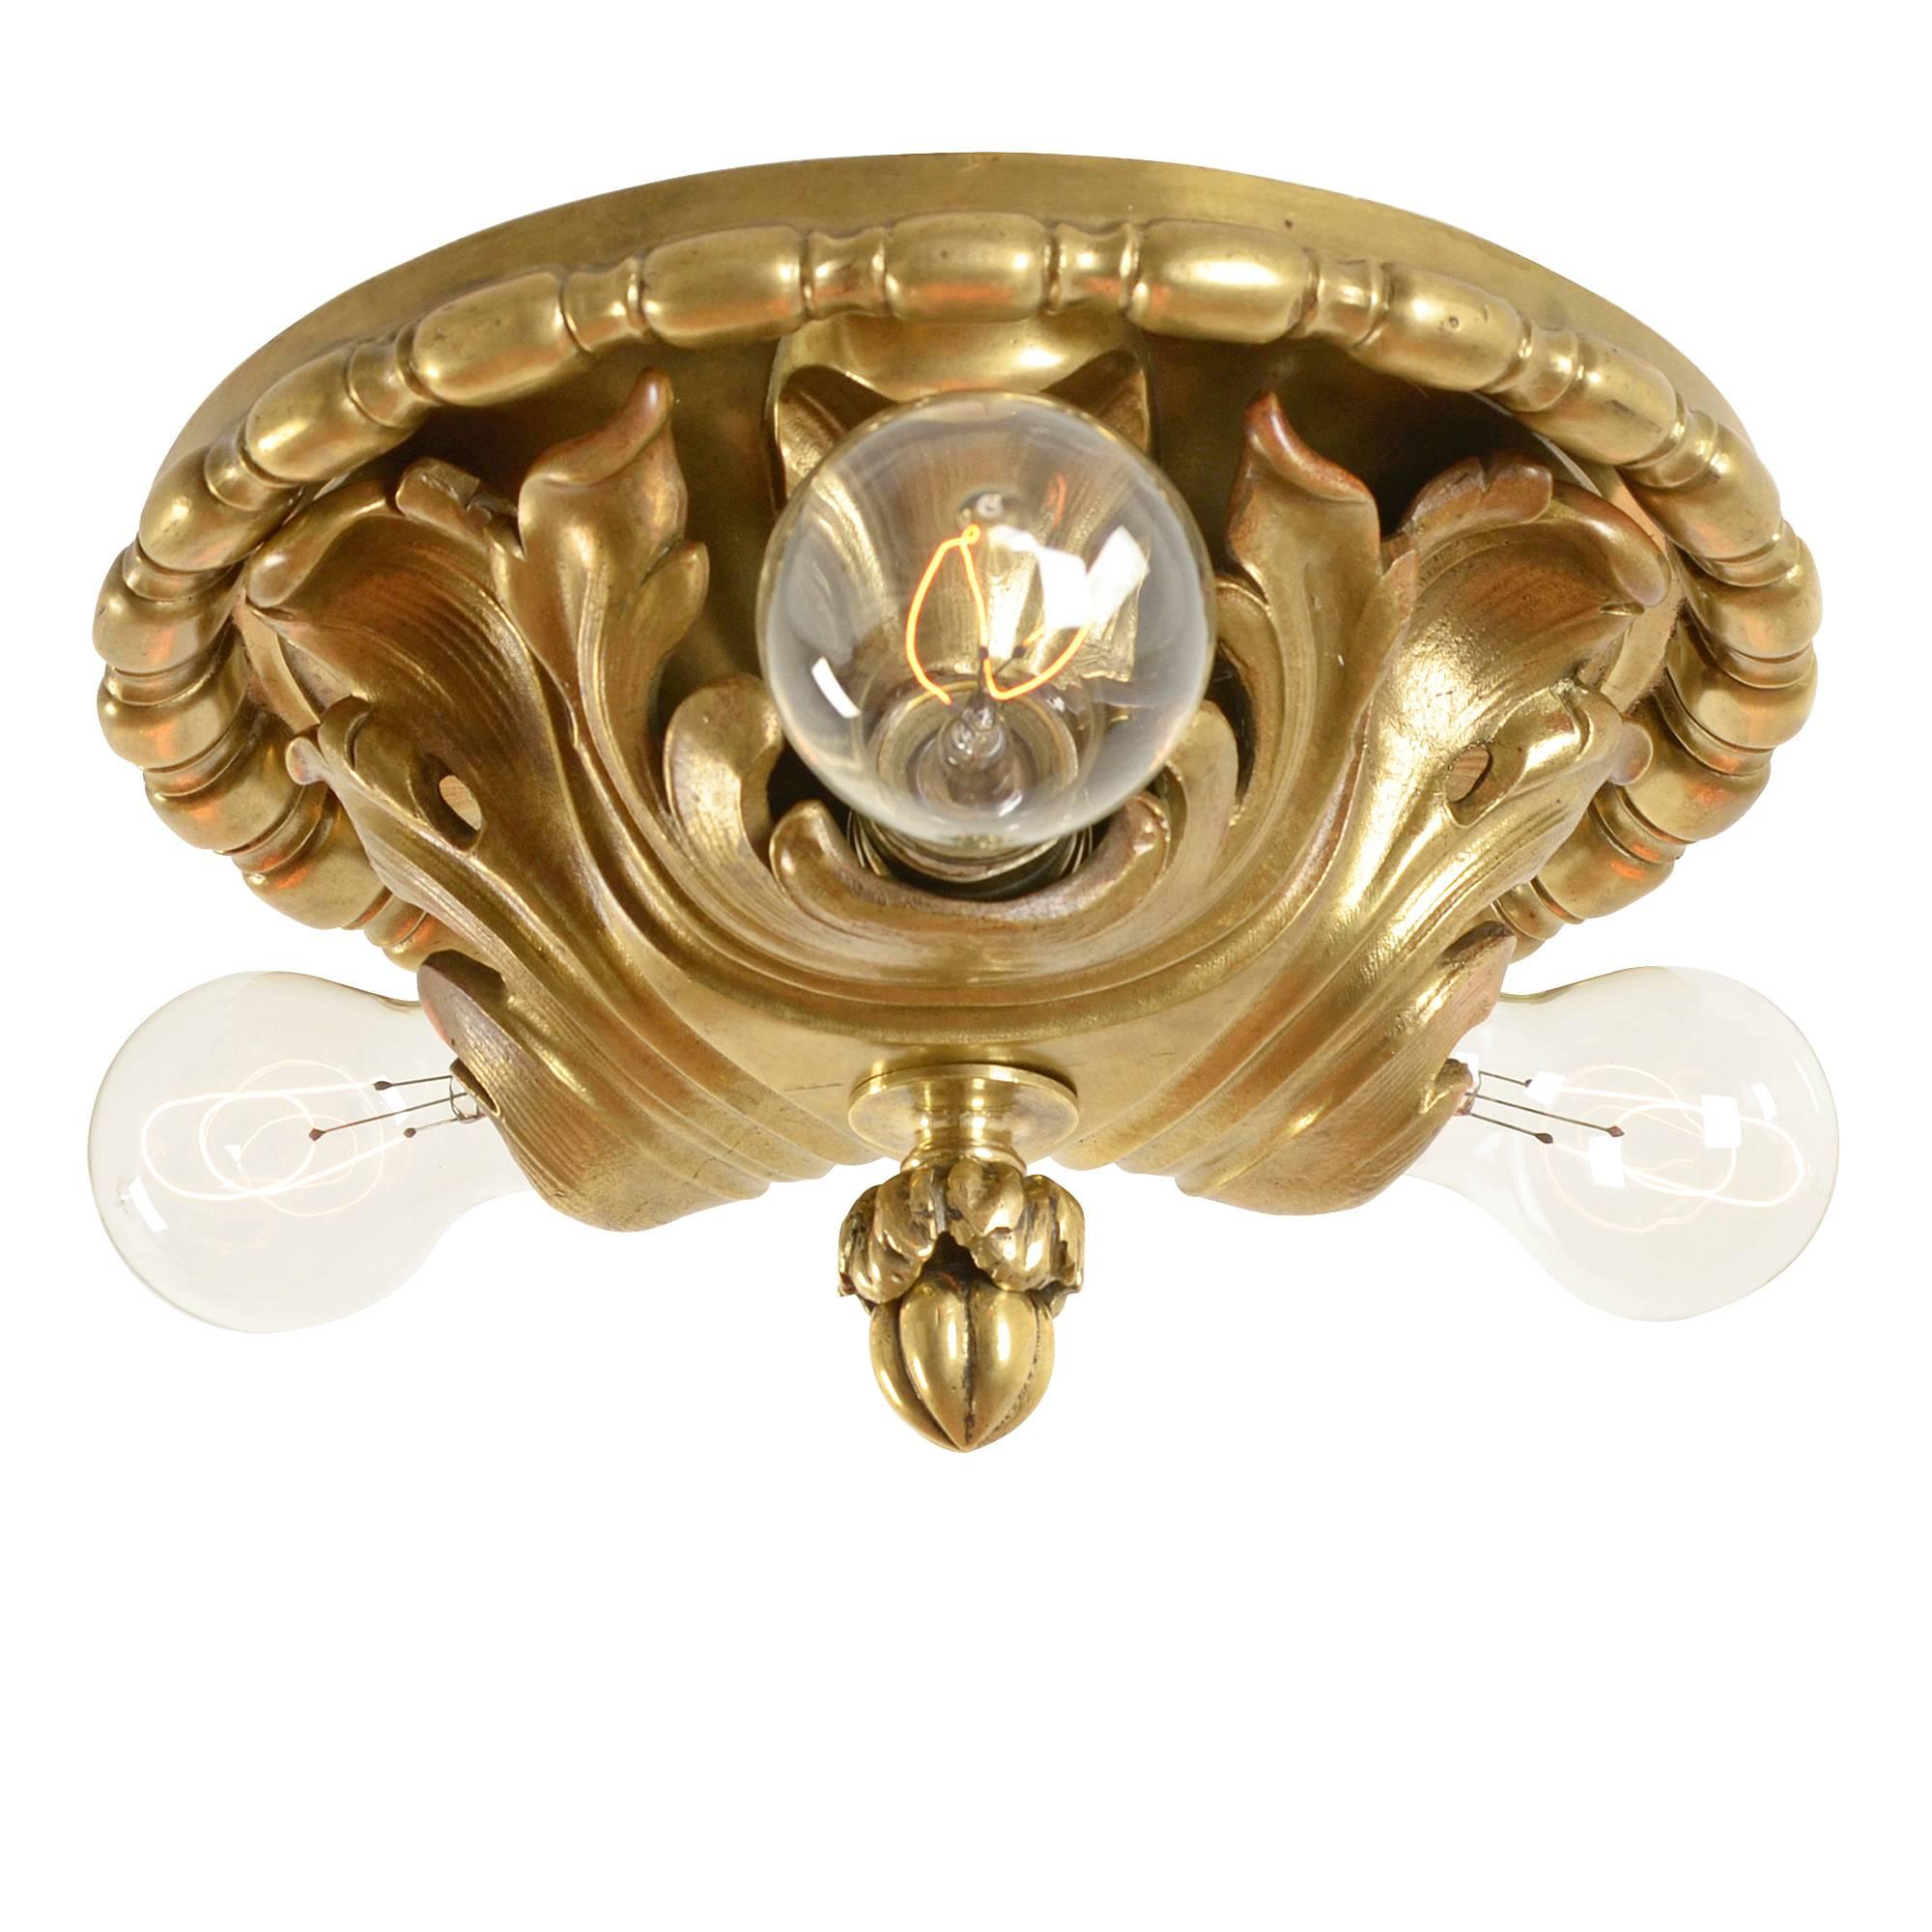 Exposed bulbs were widely popular lighting choices during the 1910s and 1920s and so was a free exploration of Classical Revival motifs. That style teamed for a high-end, yet traditional look, which was well-suited for the countless houses built